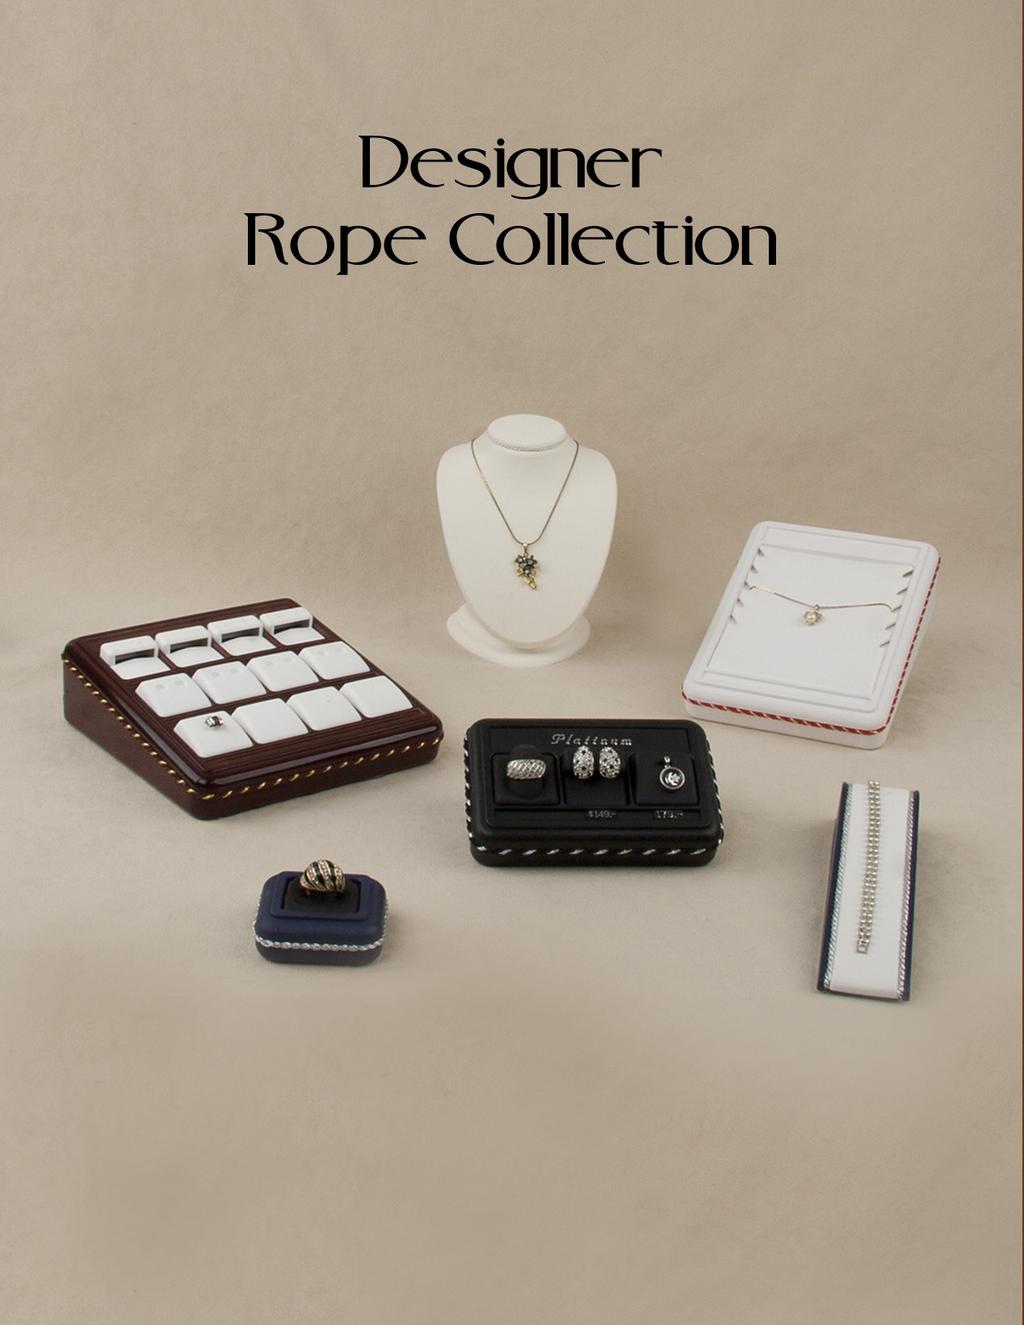 Designer Rope by Displays with a clean design and distinctive